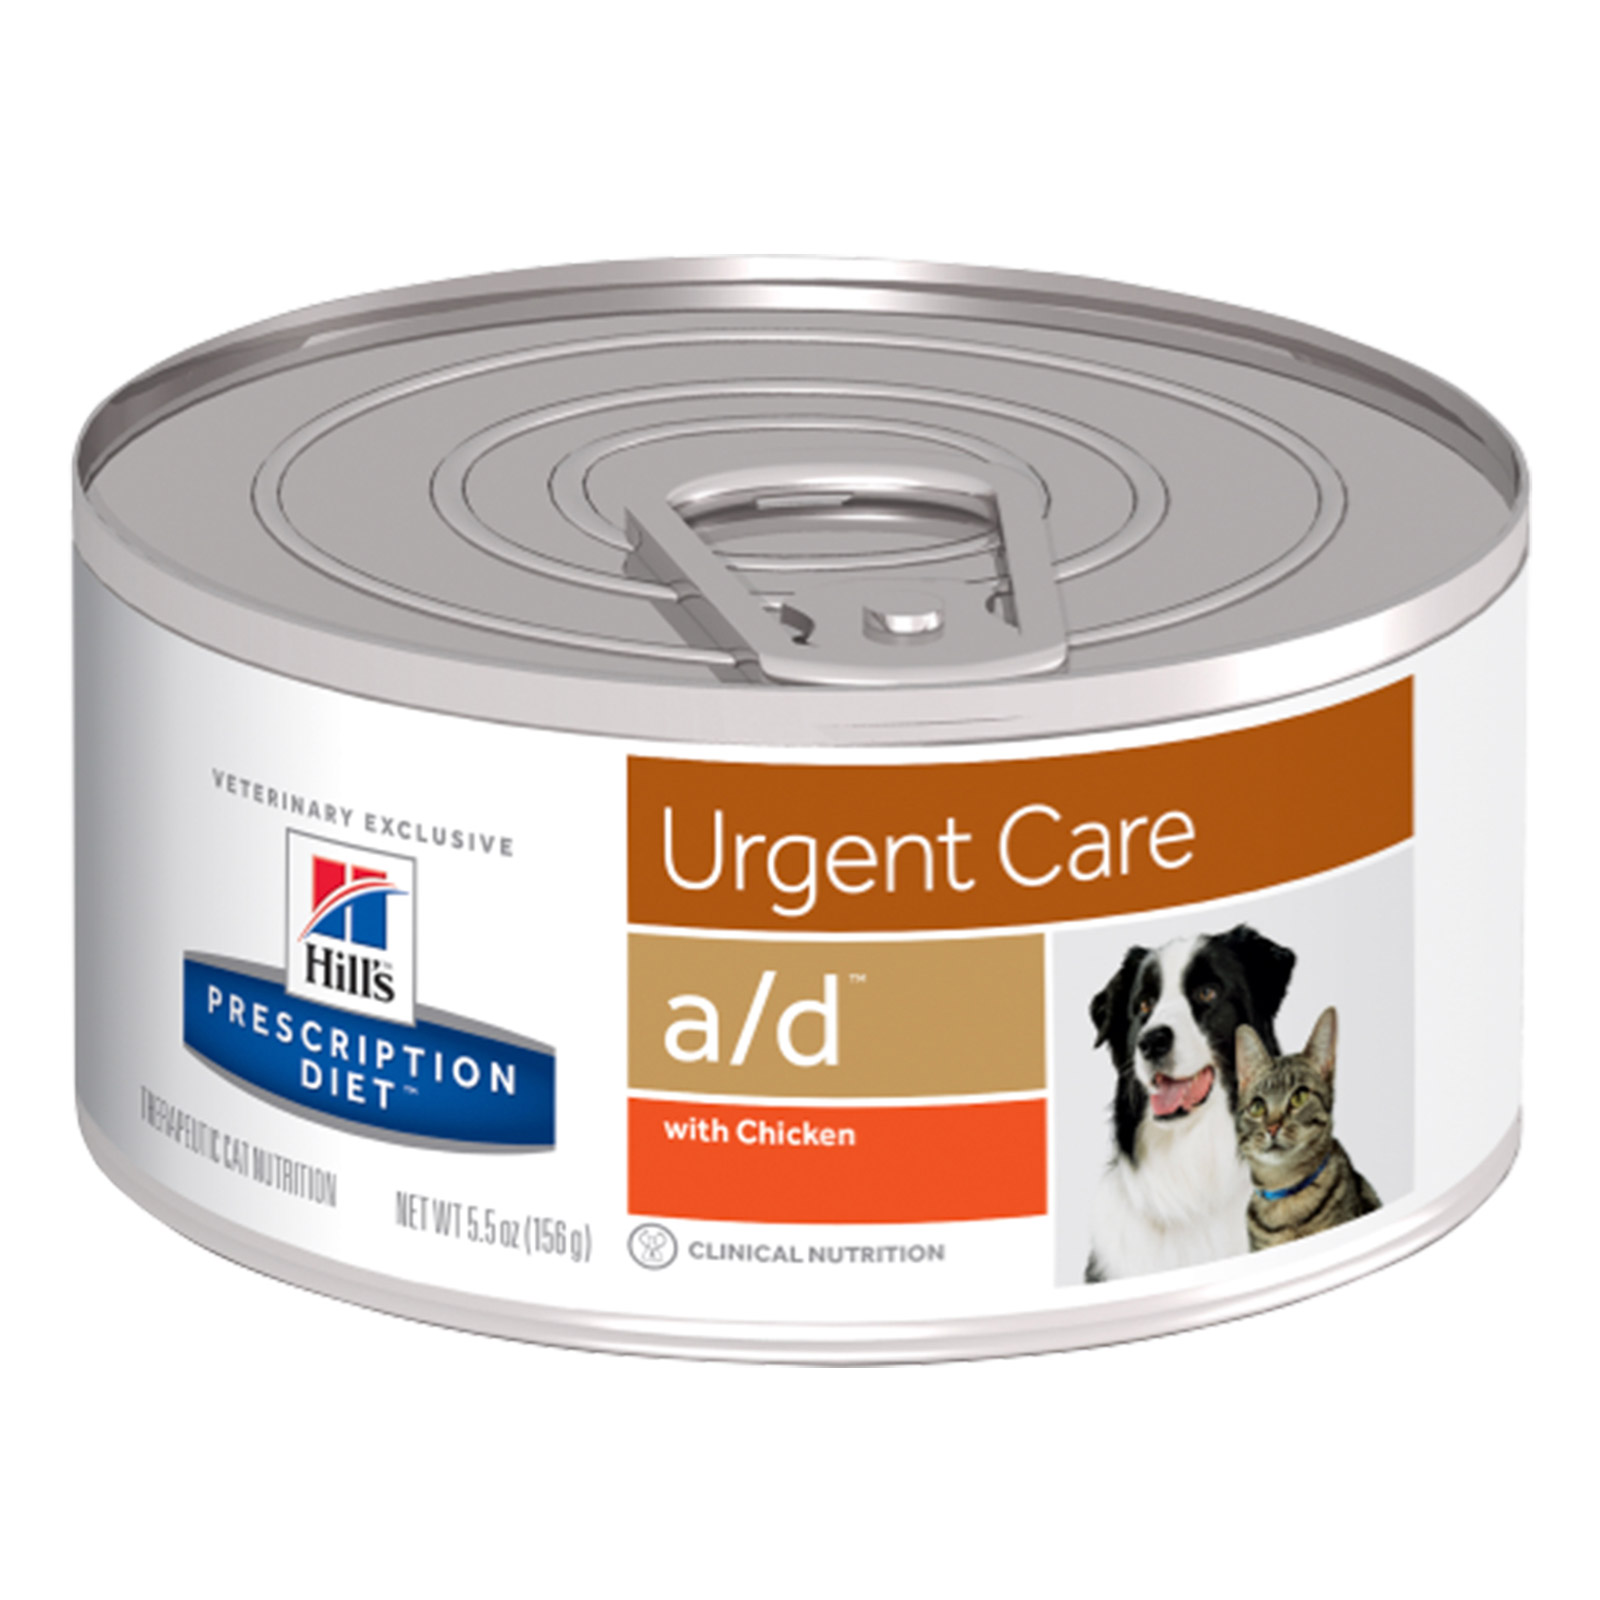 Hill's Prescription Diet a/d Canine/Feline Urgent Care with Chicken Cans for Food